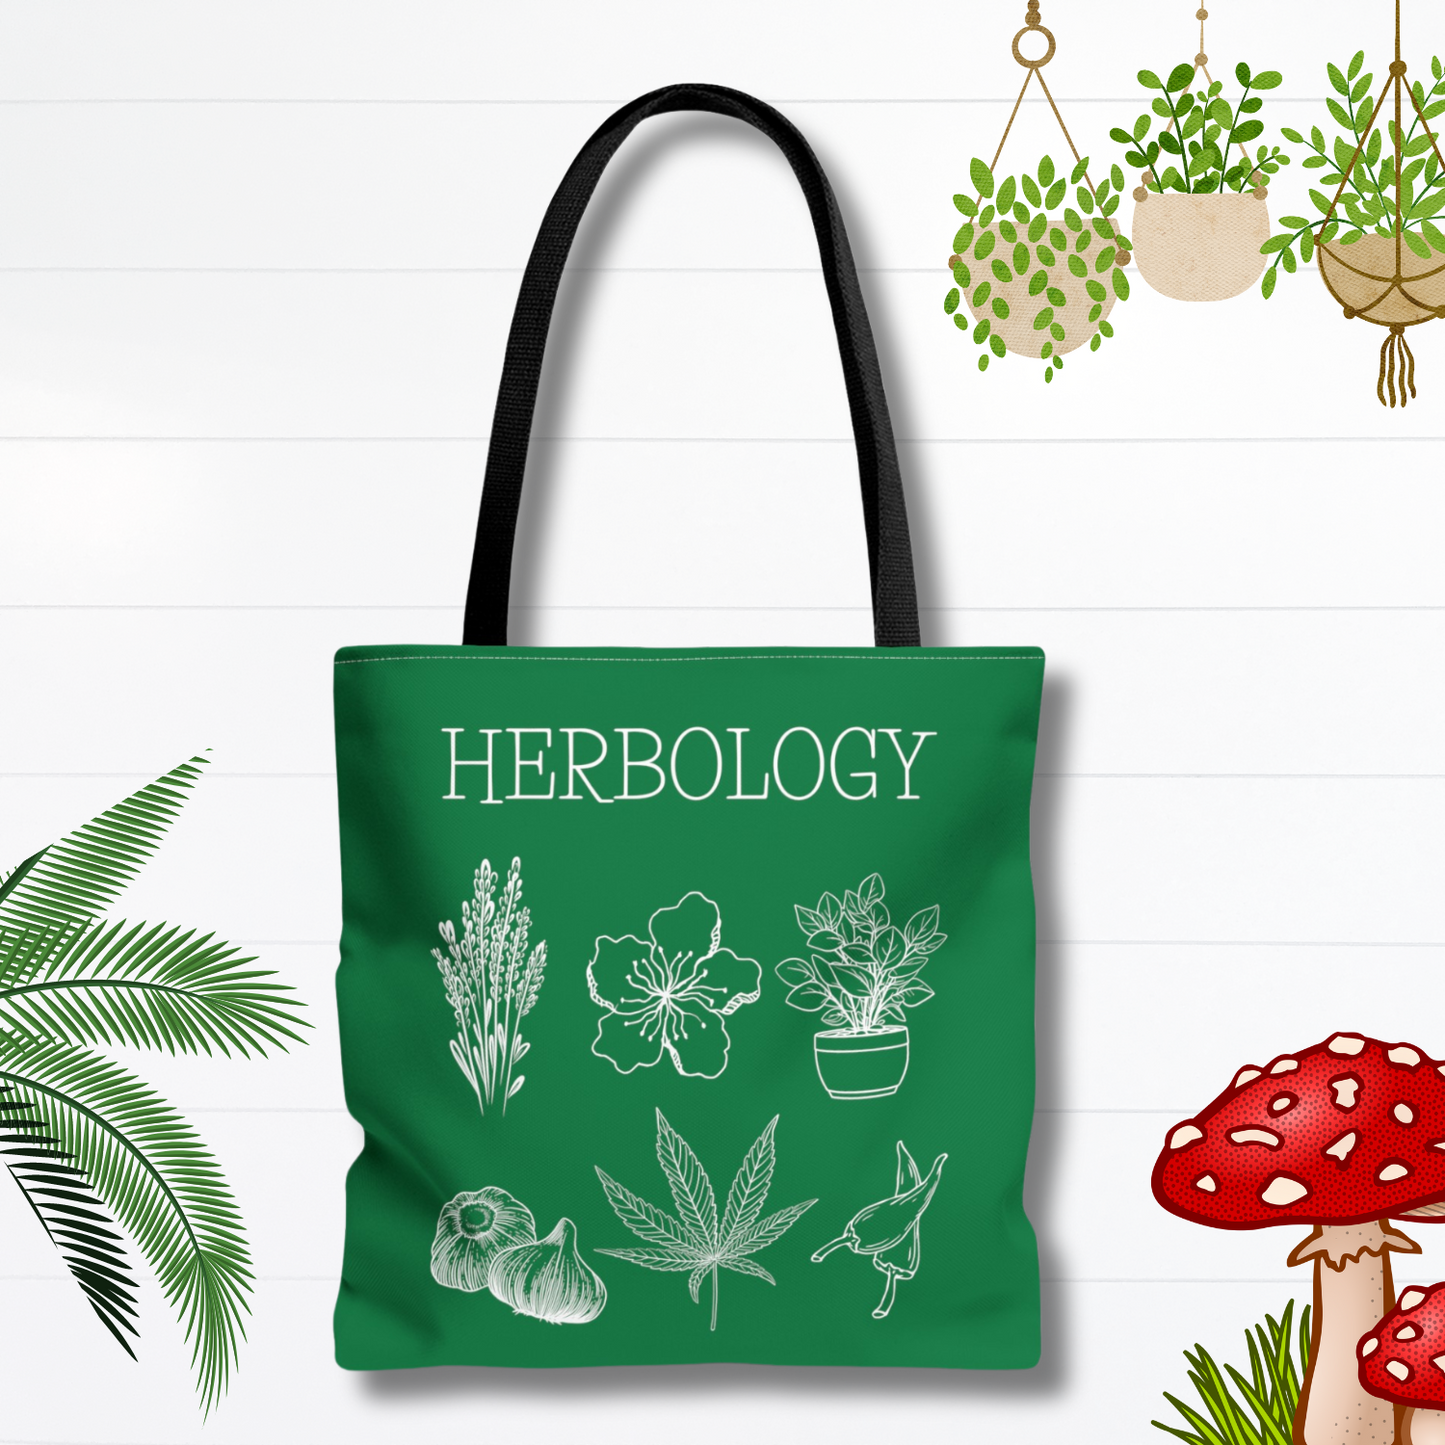 Our magical herbology tote bag is perfect for carrying enchanted plants and spellbooks, it features plants, flowers, and herbs. Bag is green with a black handle.